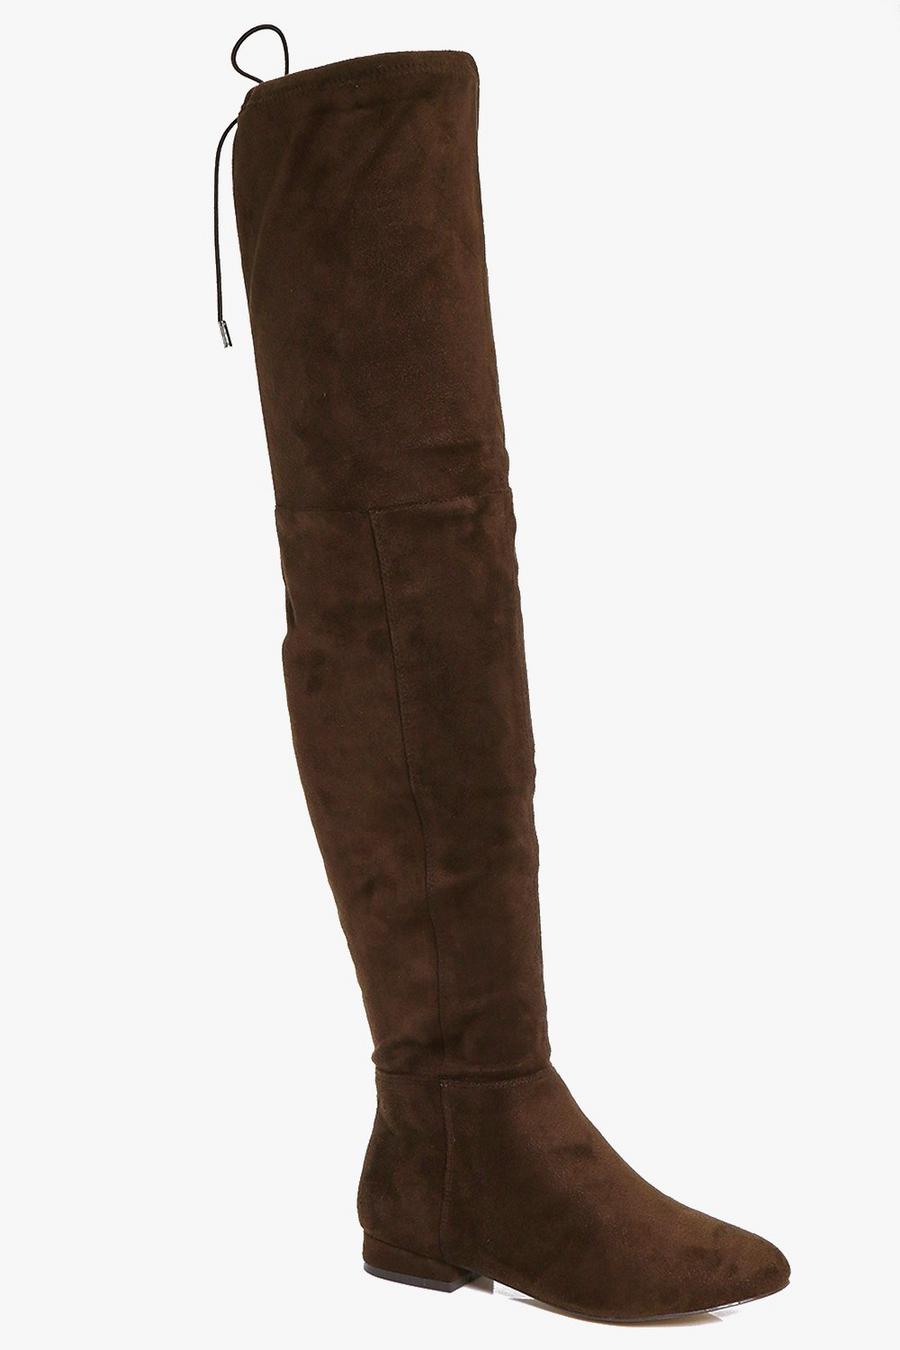 Mocha Wide Width Flat Thigh High Tie Back Boots image number 1